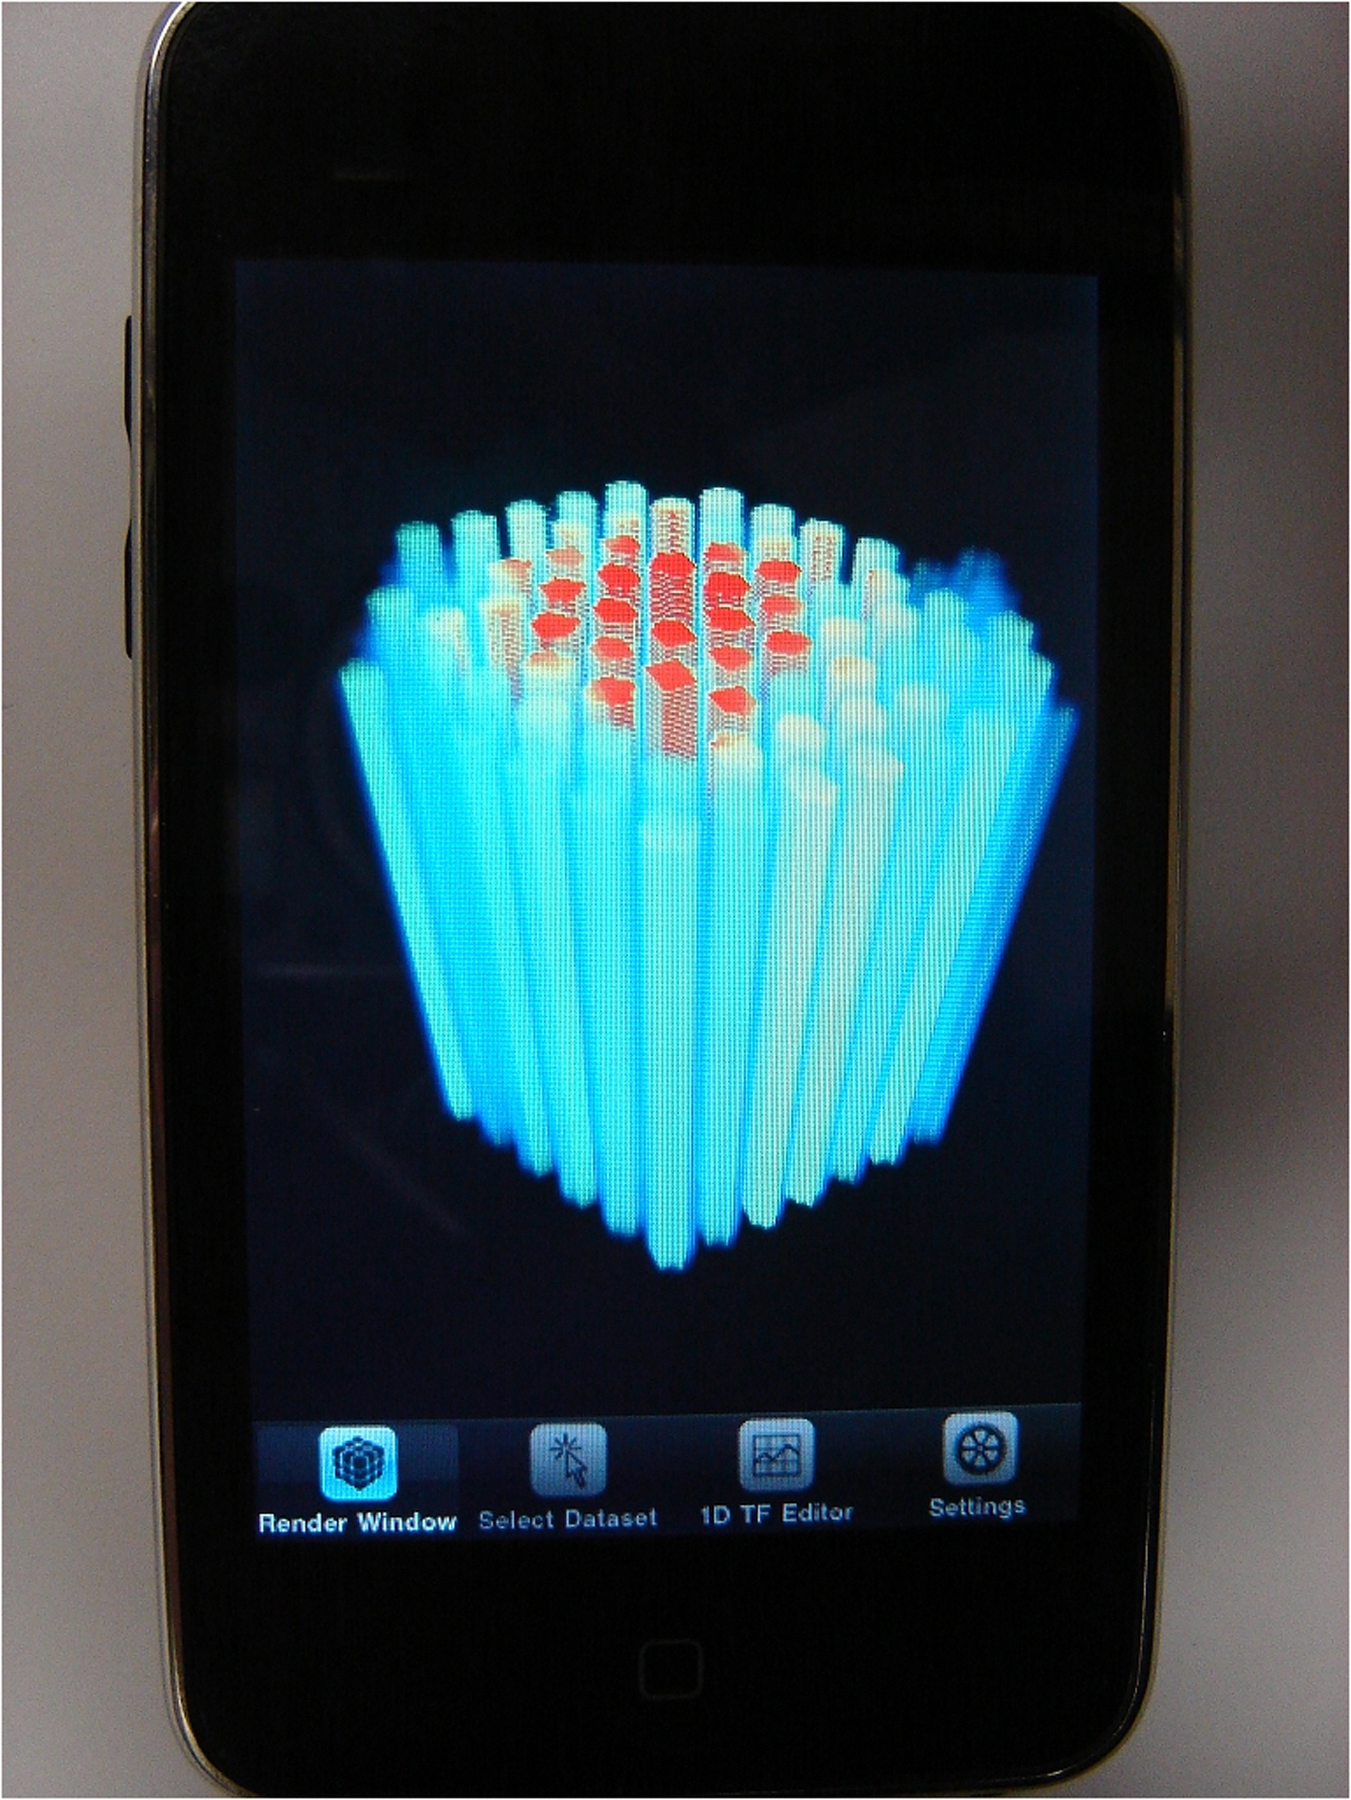 iPhone software developed at the University of Utah's Scientific Computing and Imaging Institute is being used by the university's Nuclear Engineering Program to display computer-generated simulations of a nuclear reactor's core. The simulation displayed here shows a side view of the fuel rod assembly within the university's TRIGA research reactor. Red indicates the region of the core where the nuclear fission reaction is strongest. The iPhone visualization software, ImageVis3D Mobile, is free through the Apple App Store, but the reactor simulation software is not commercially available.